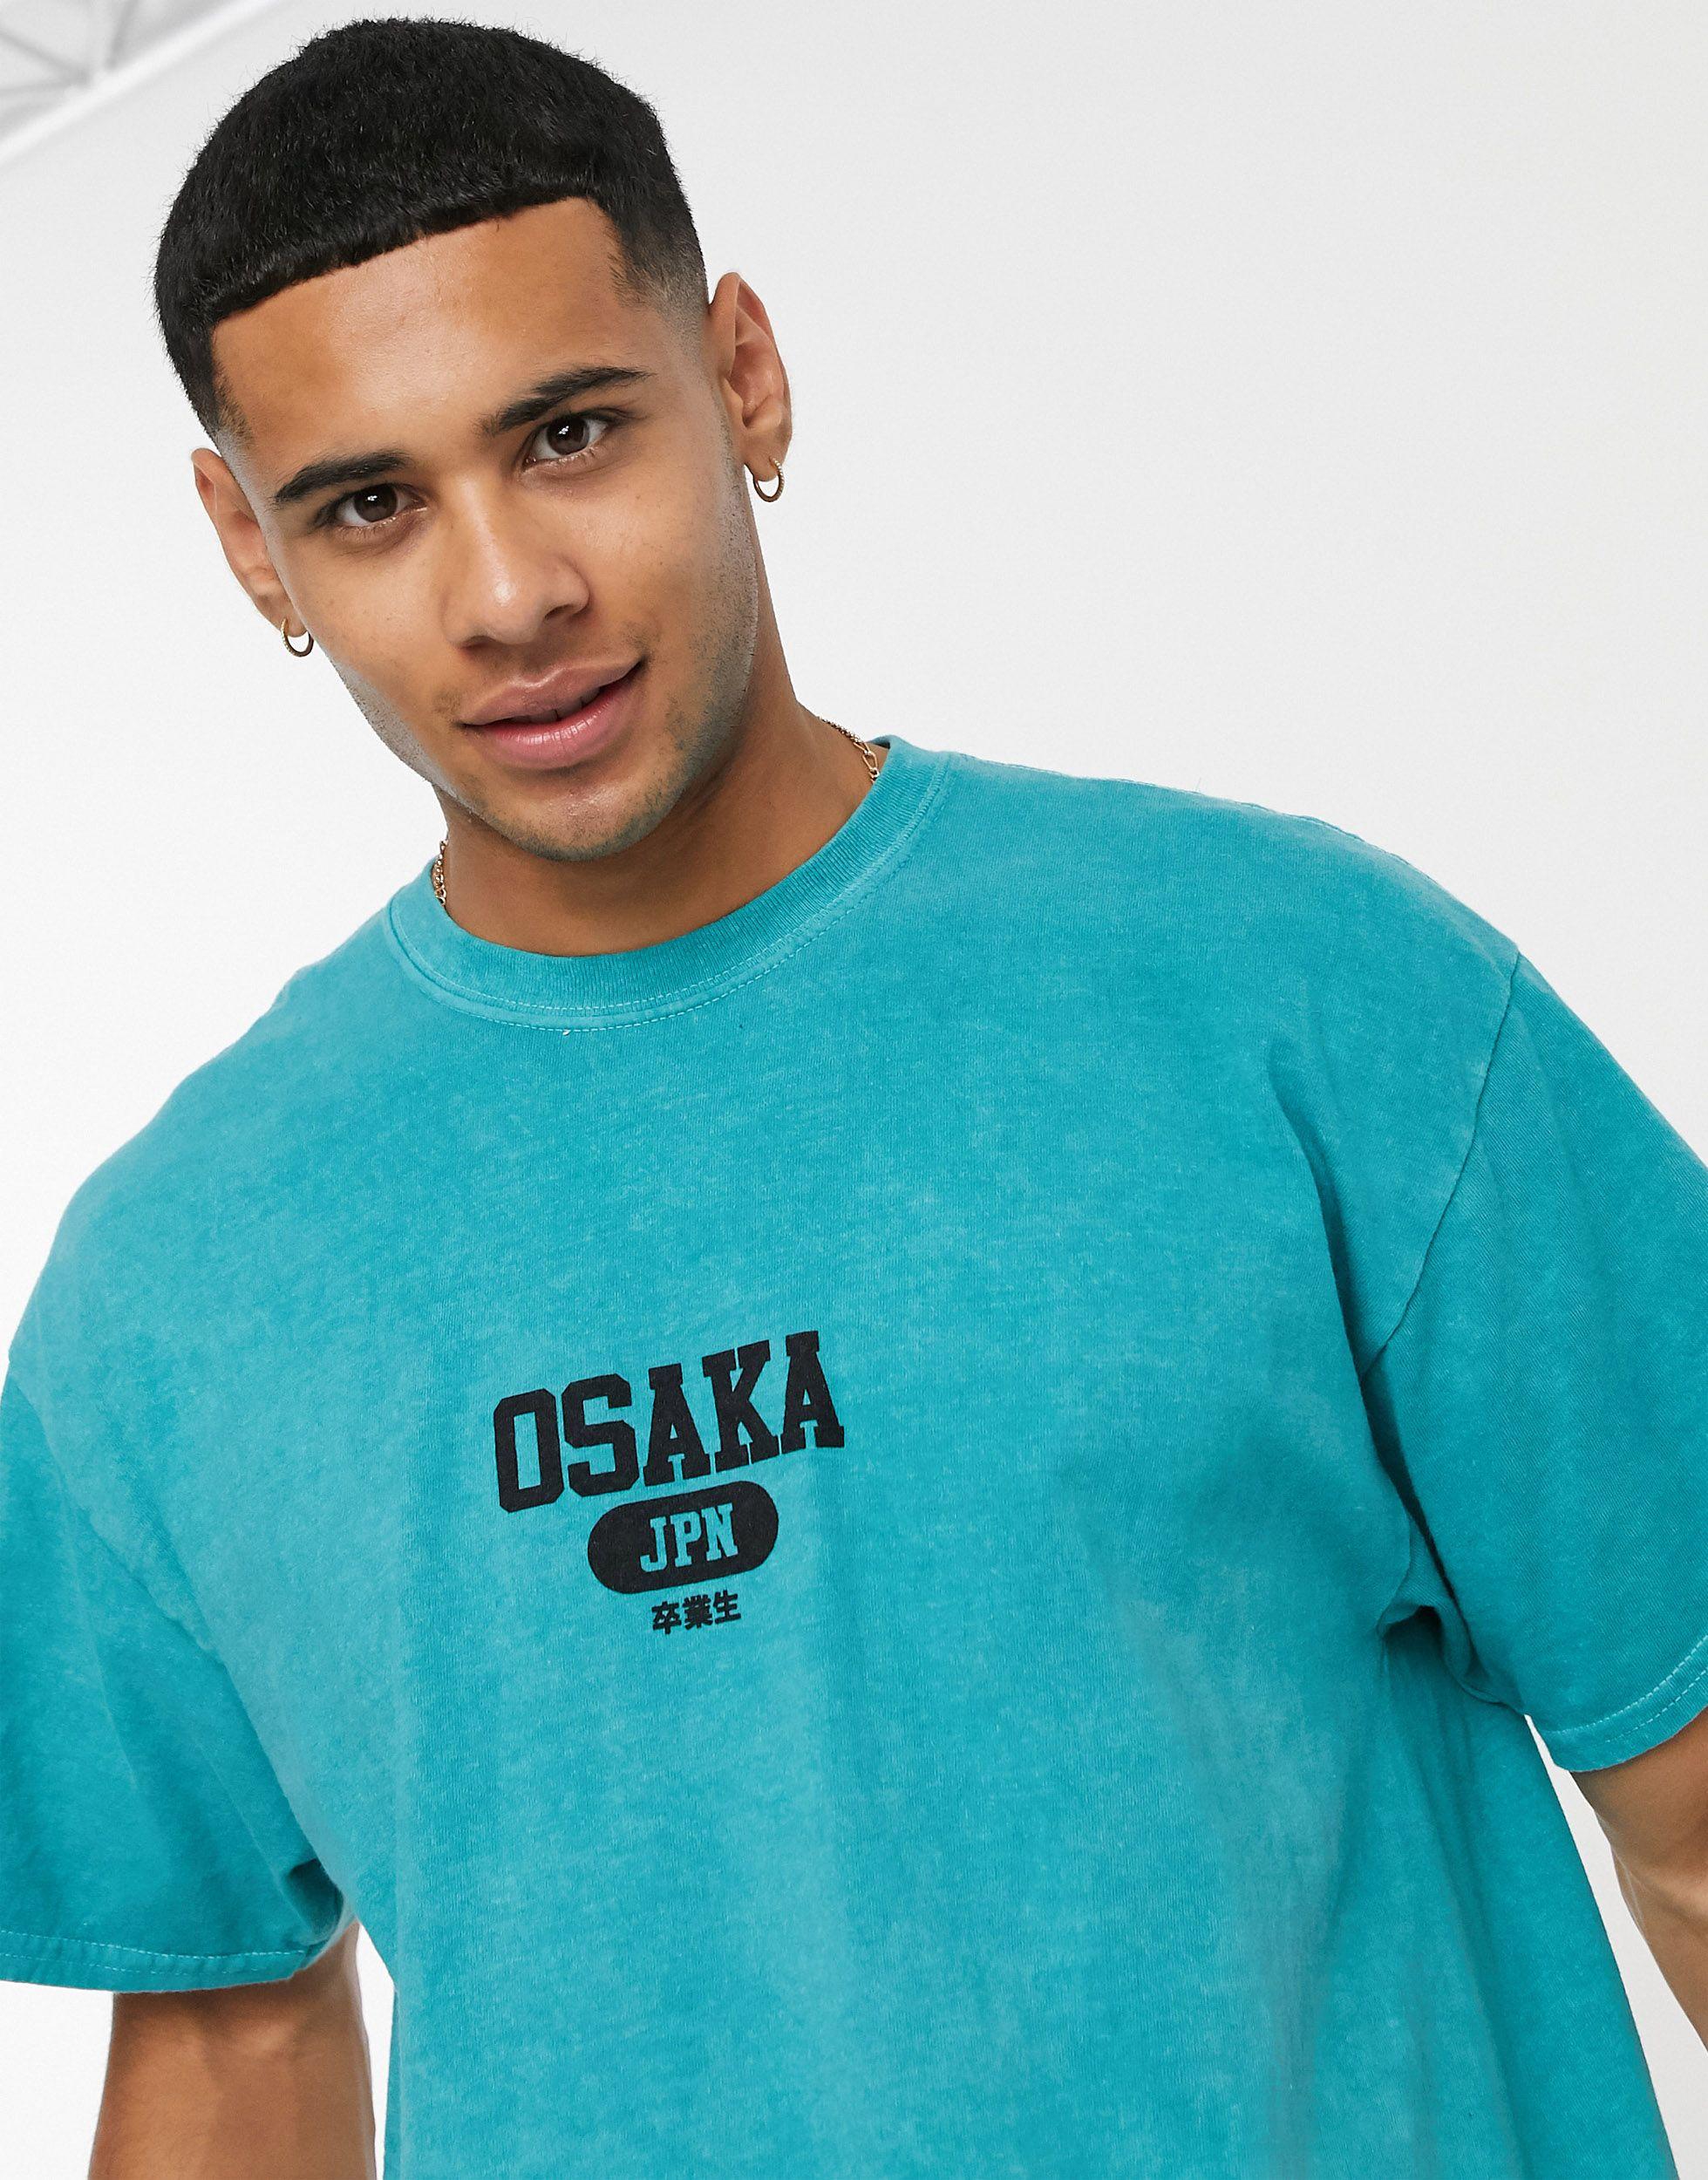 New Look Oversized T-shirt With Osaka Print in Green for Men - Lyst